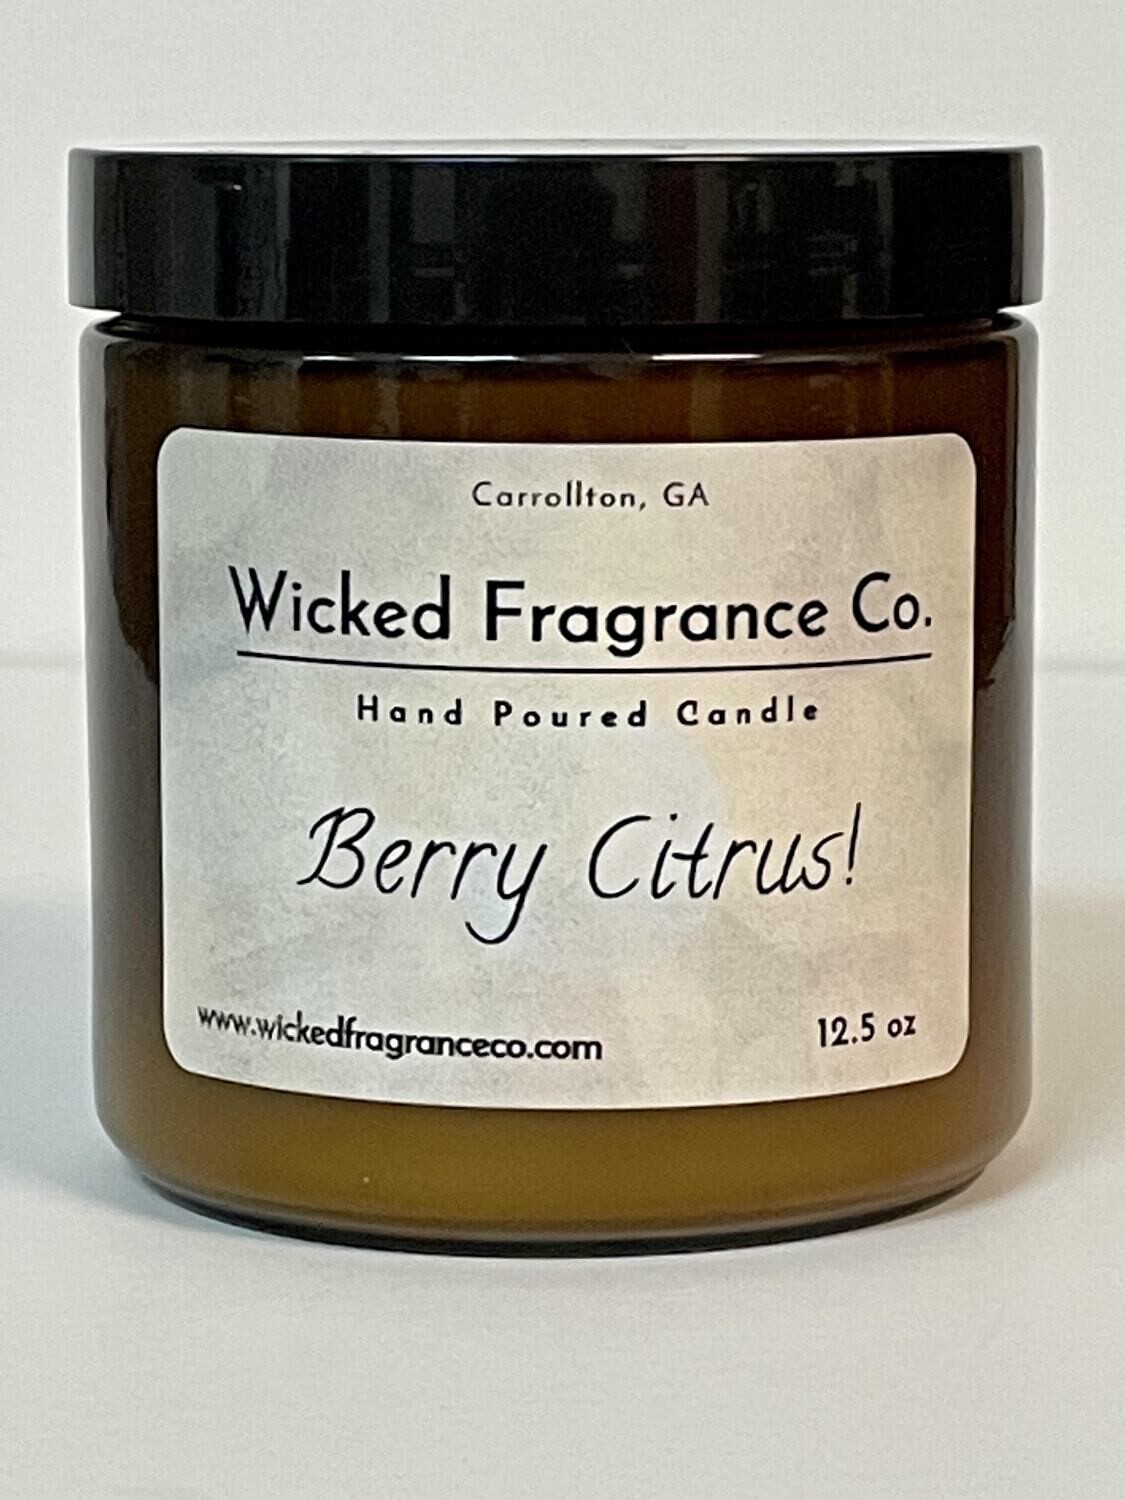 Berry Citrus! Candle Large Amber